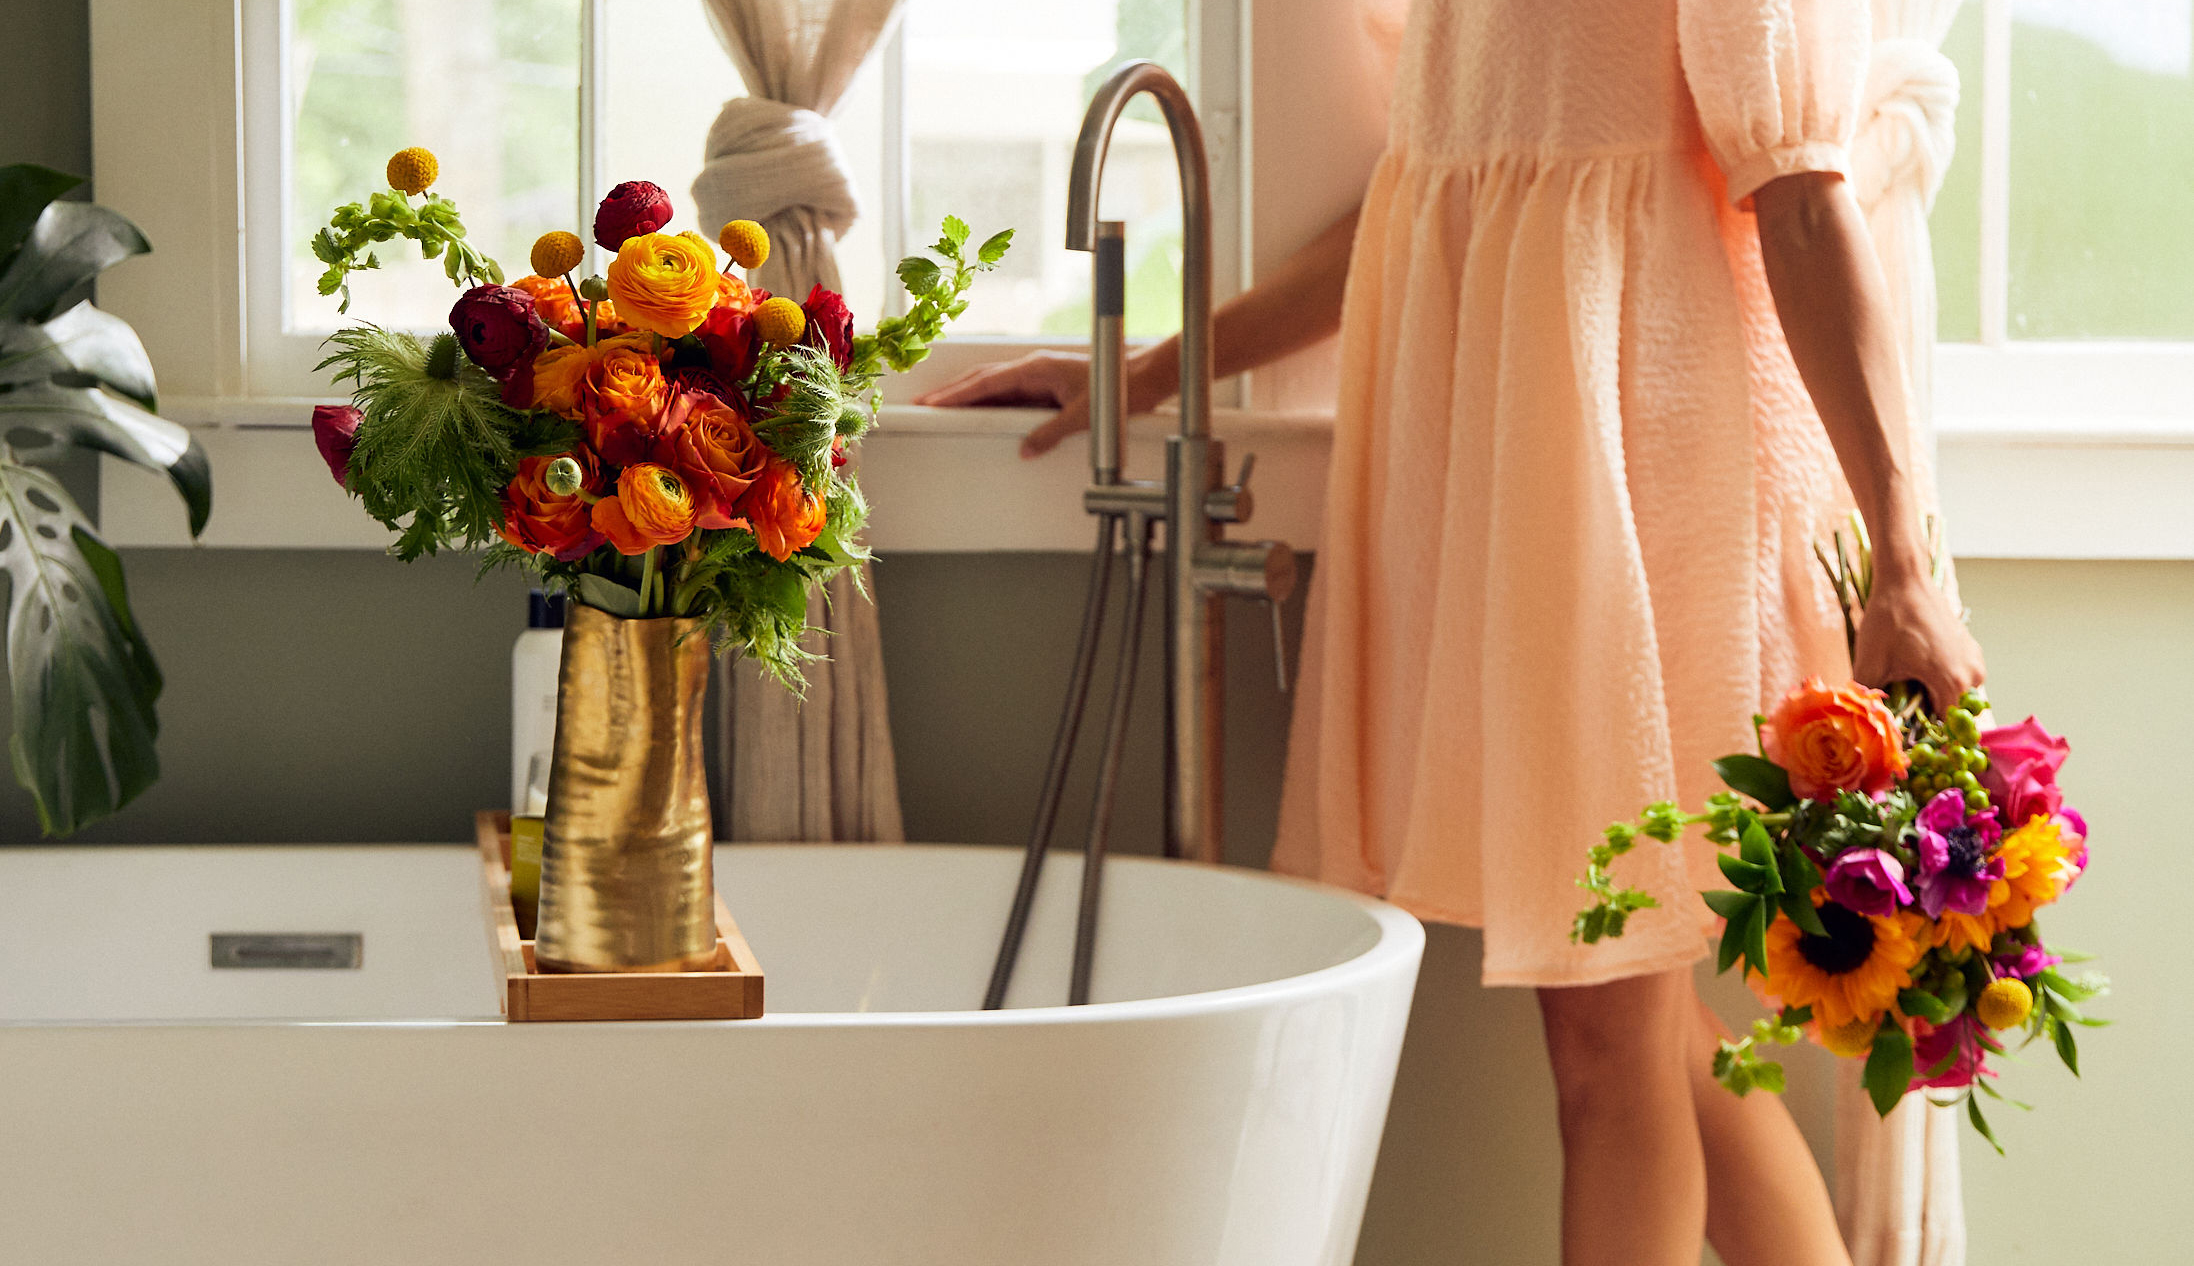 Woman decorating her  bathroom with summer flowers, available for next day flower delivery.